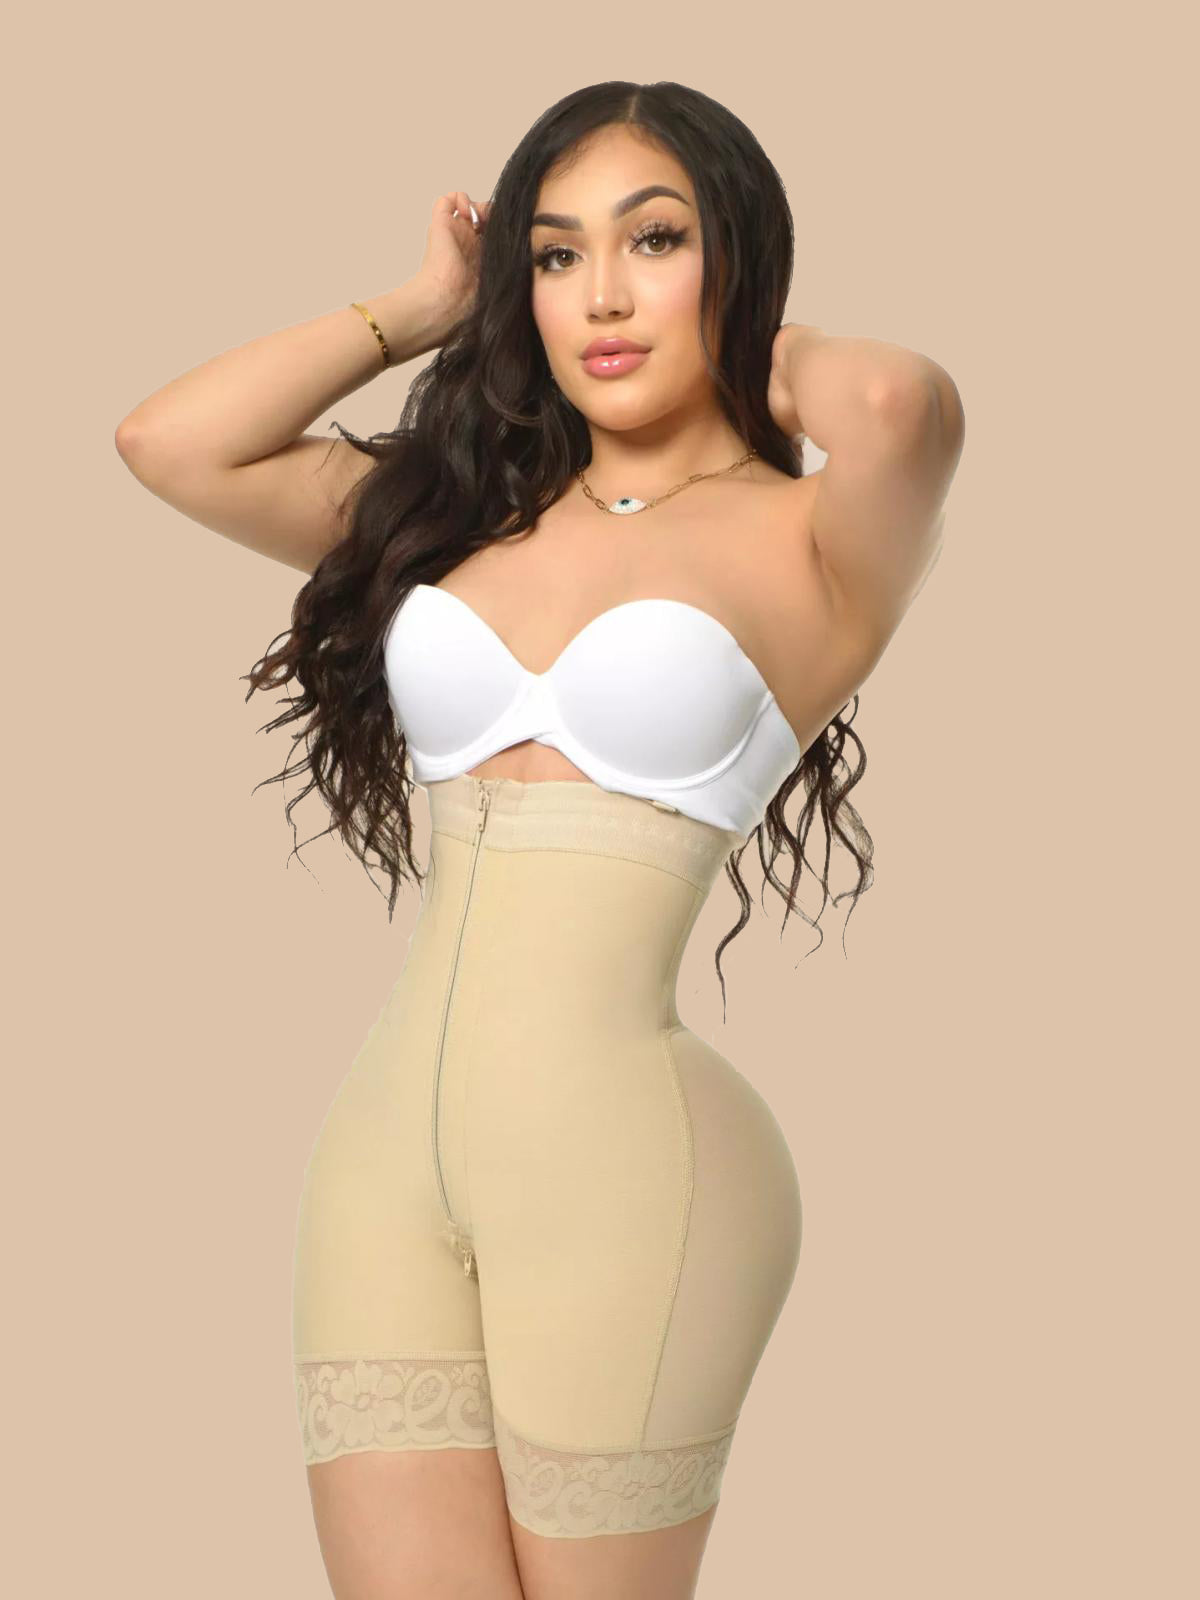 (MORE THAN 40% OFF) Lift and Shape Your Curves with Butt Lifter Shapewear Panties